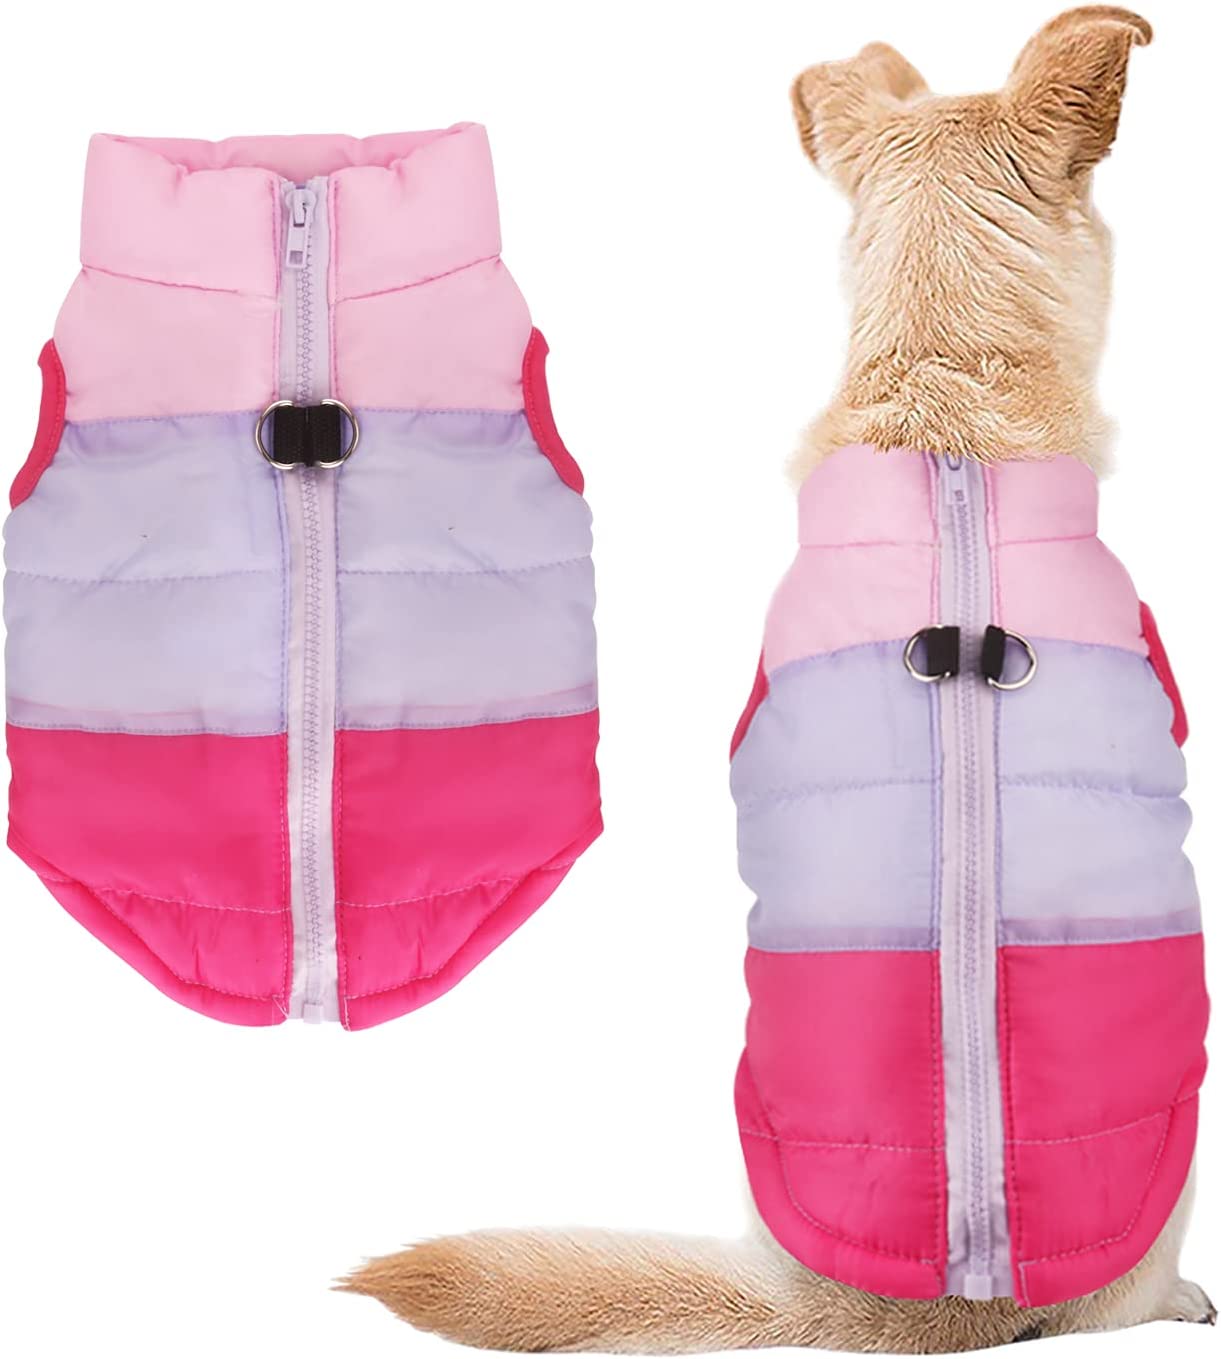 Idepet Pet Dog Cat Coat with Leash Anchor Color Patchwork Padded Puppy Teddy Chihuahua Jacket Vest Costumes Pug Clothes (XS,Rose Red)